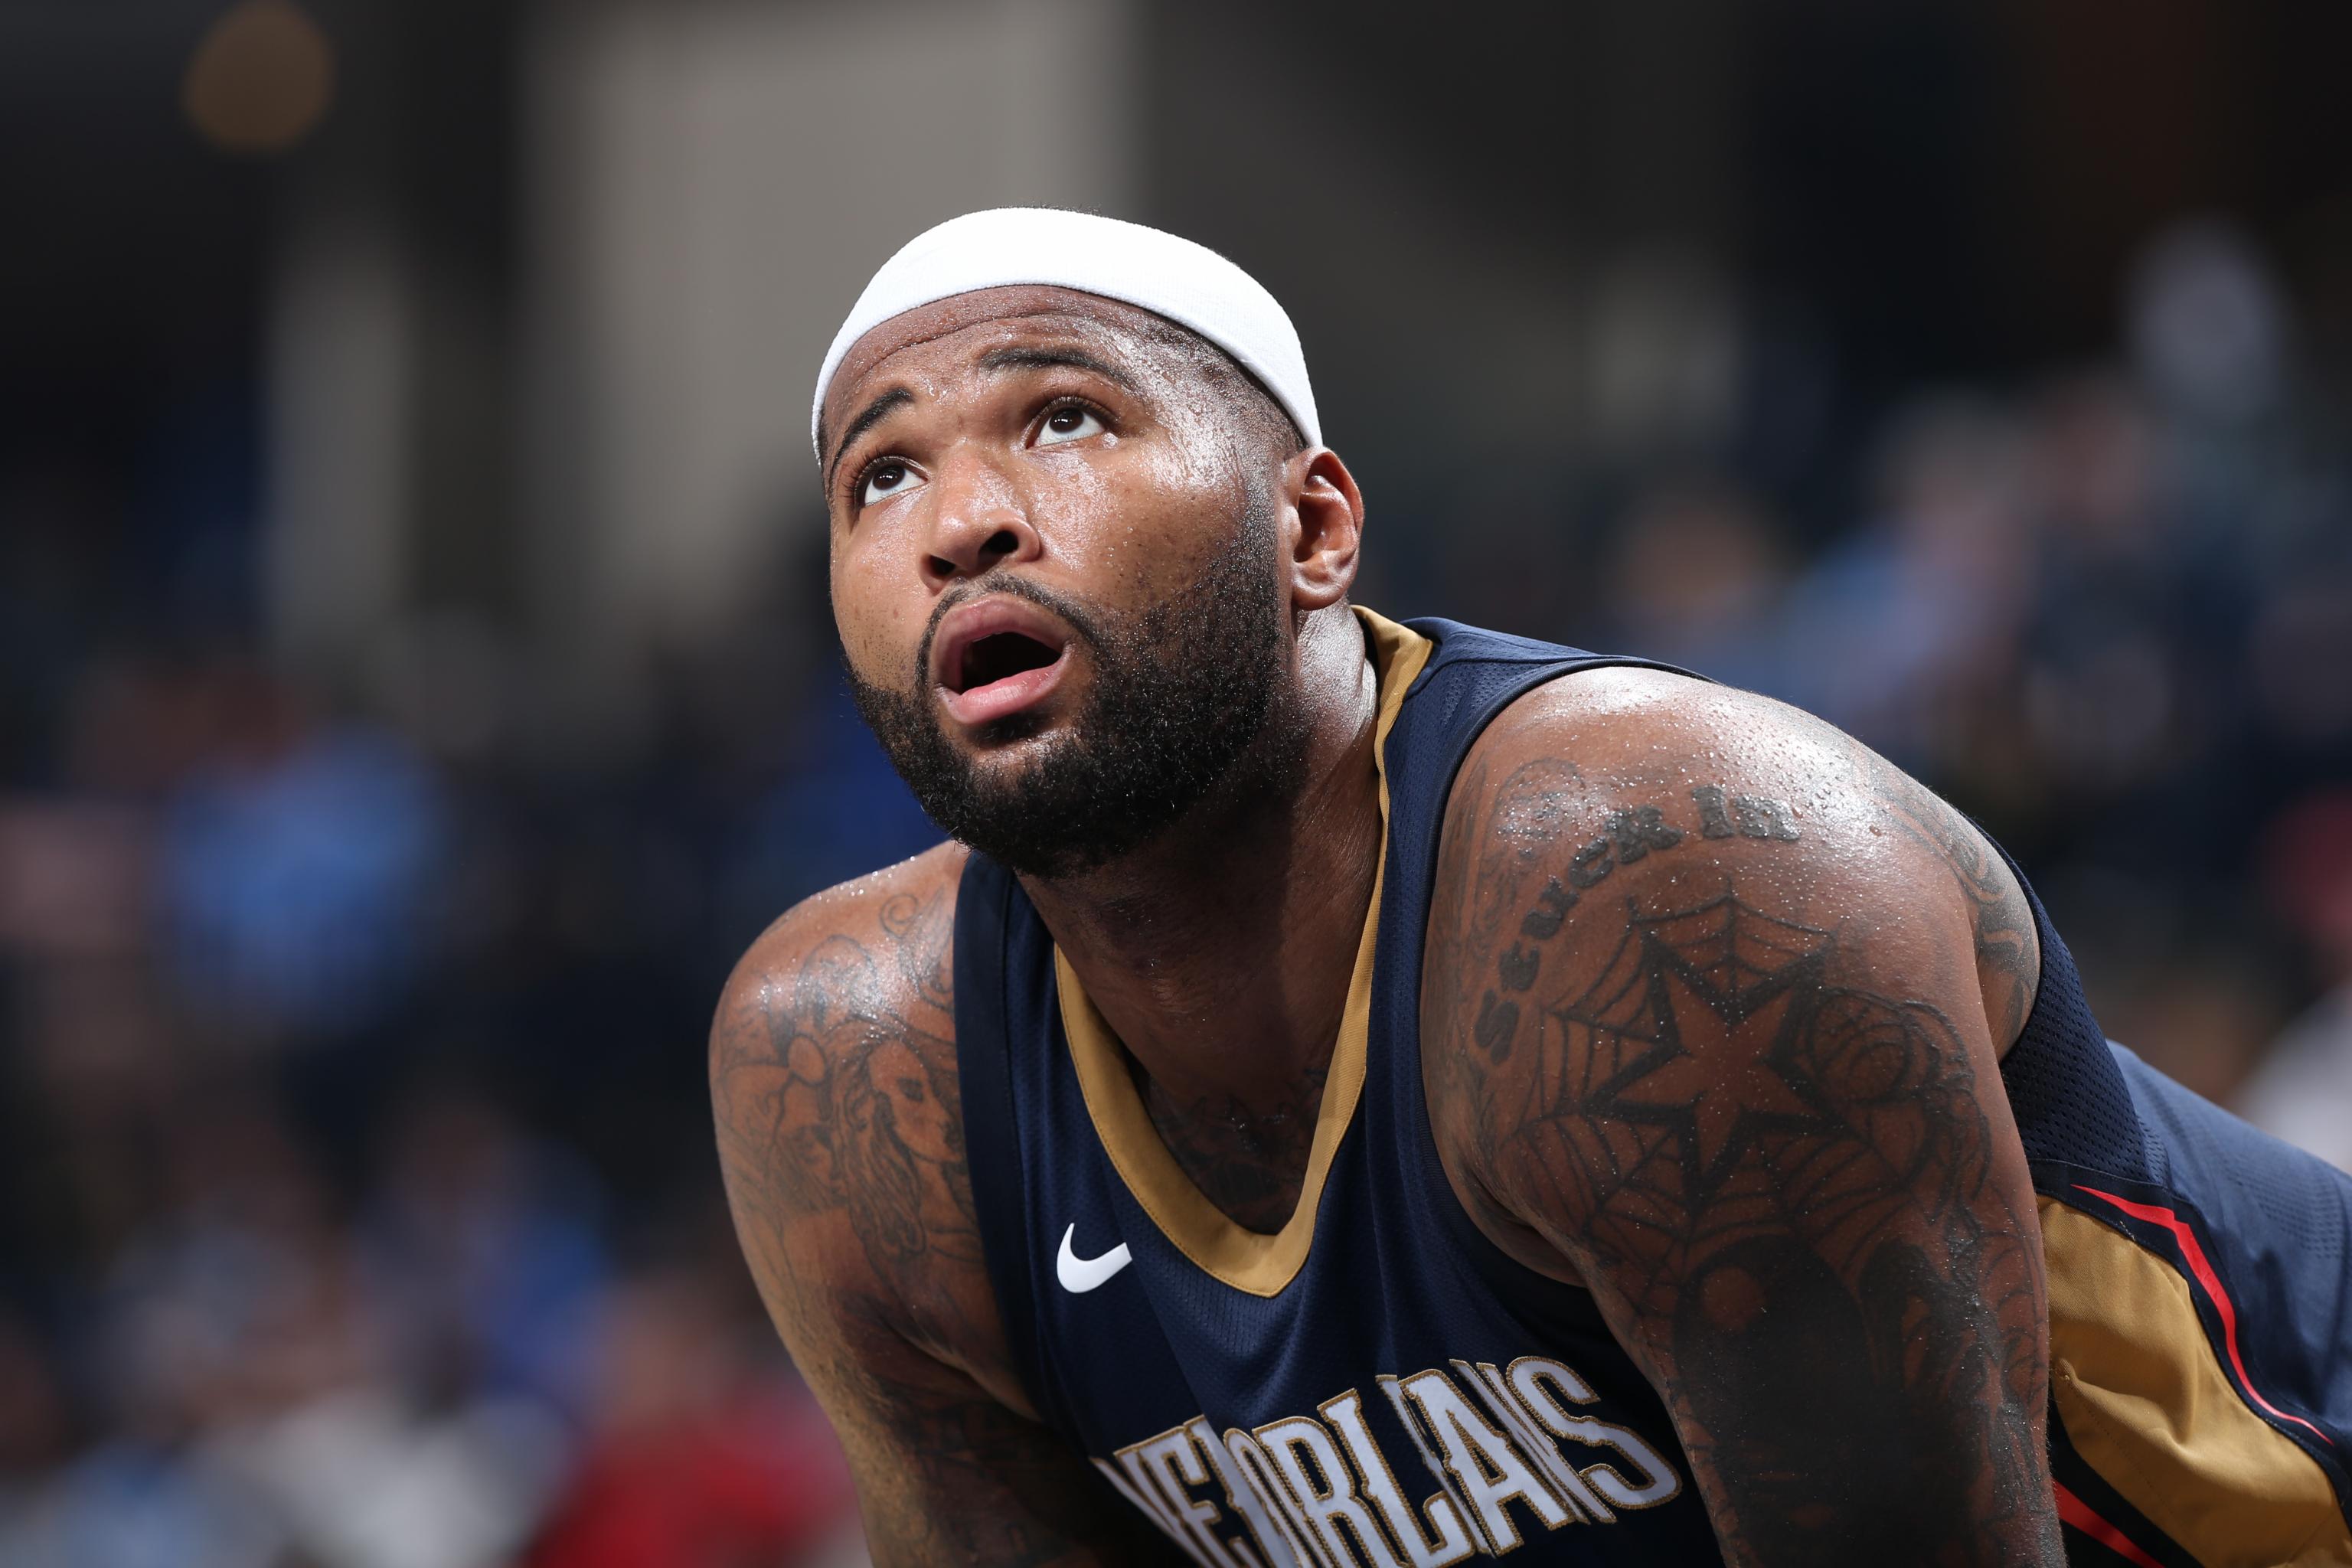 Four years ago, DeMarcus Cousins was already calling himself the